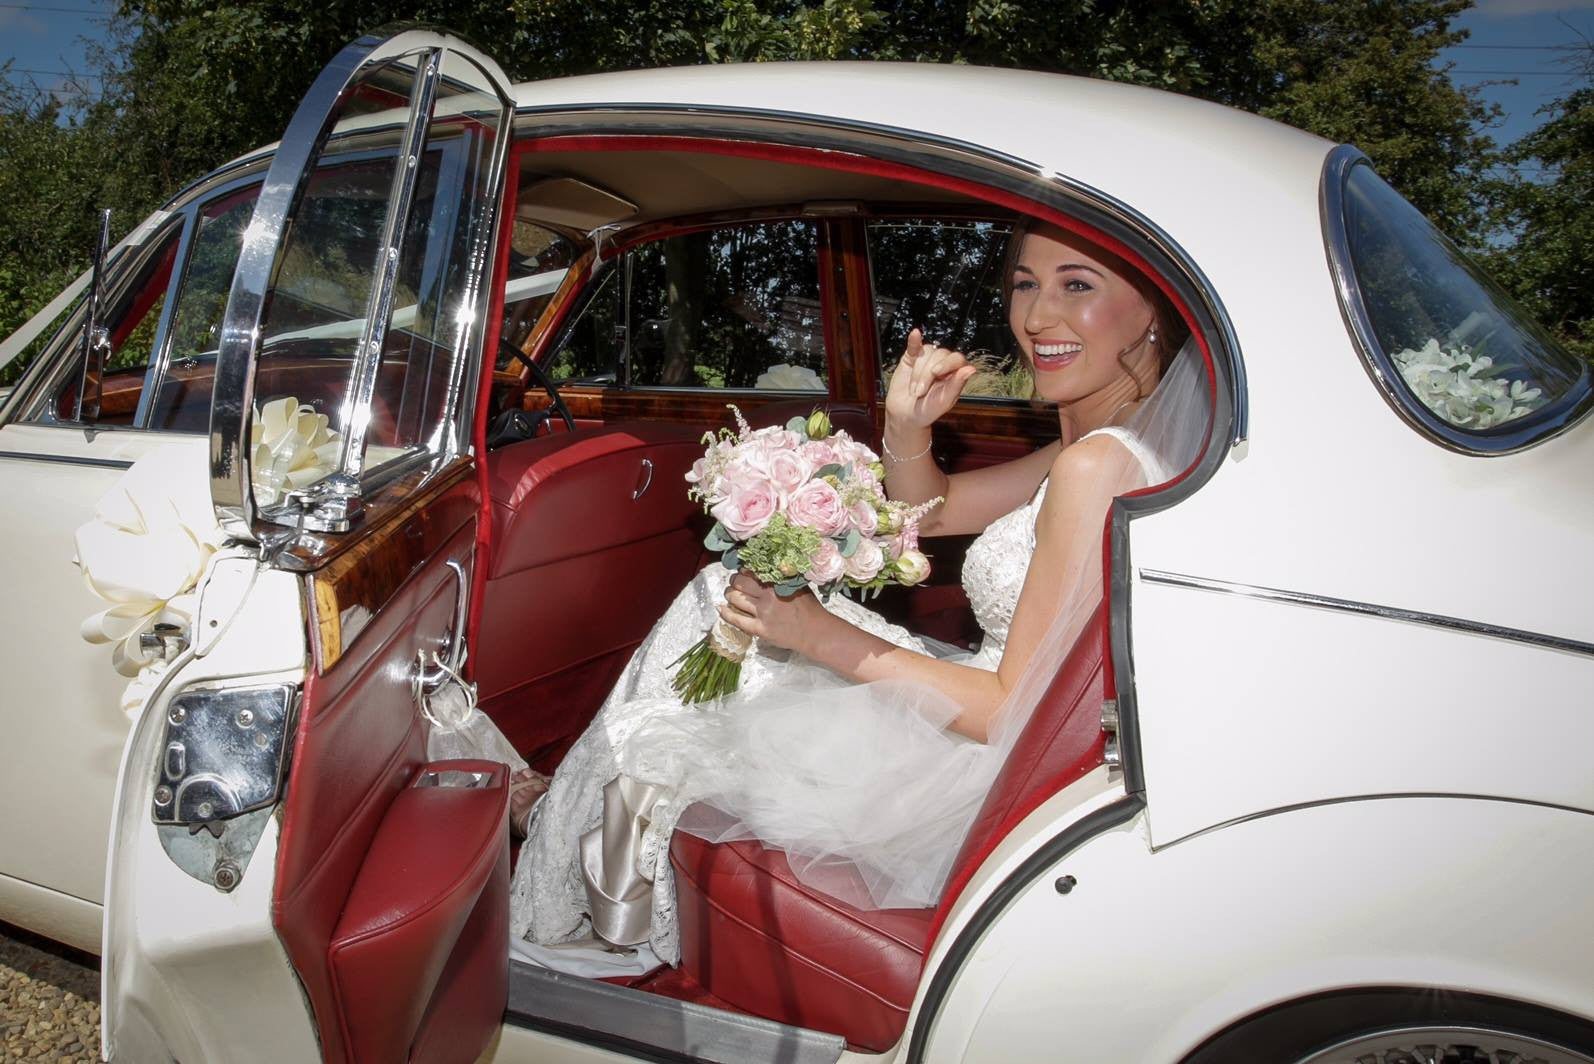 Bride with pink Rose bridal bouquet in the wedding car.